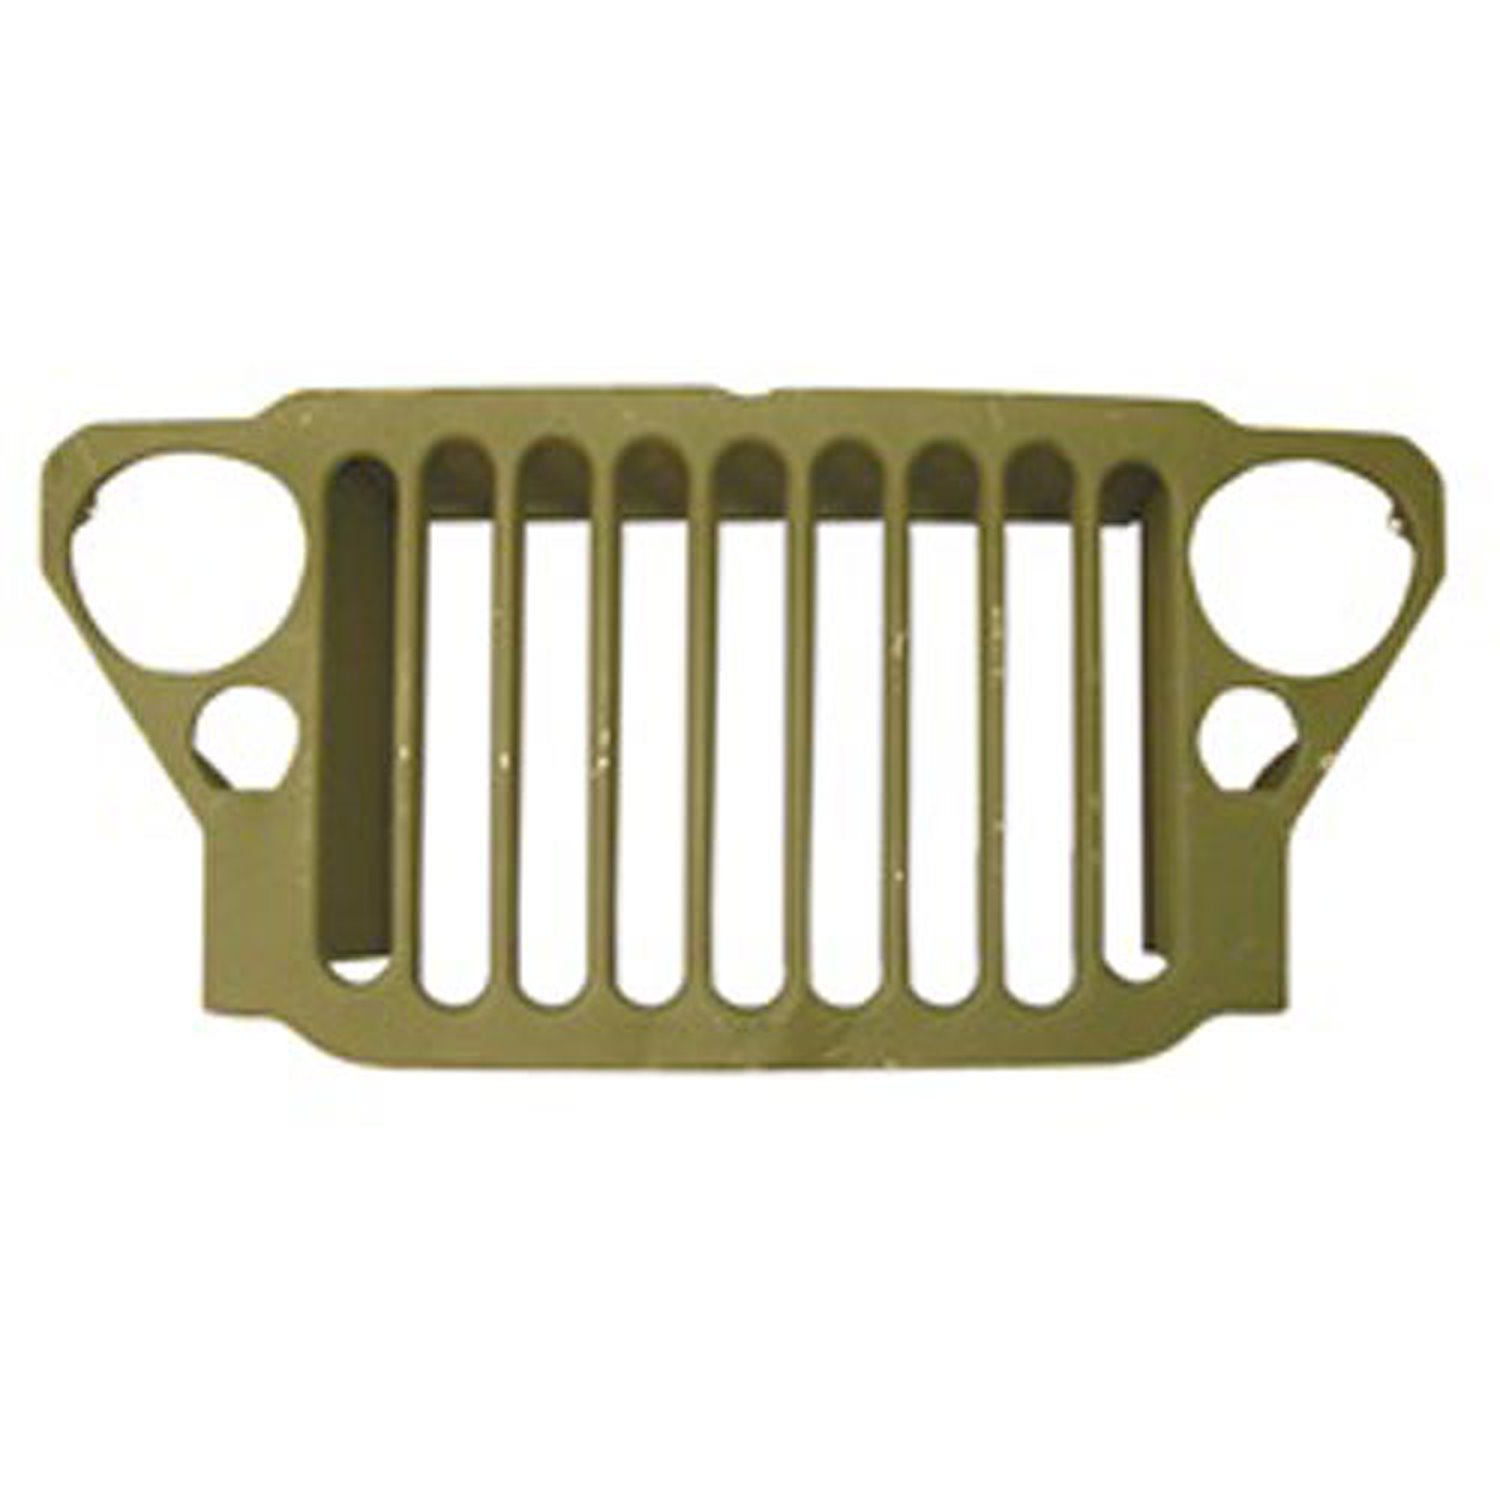 This reproduction stamped 9 slot grille from Omix-ADA fits 41-45 Willys MB and Ford GPW.